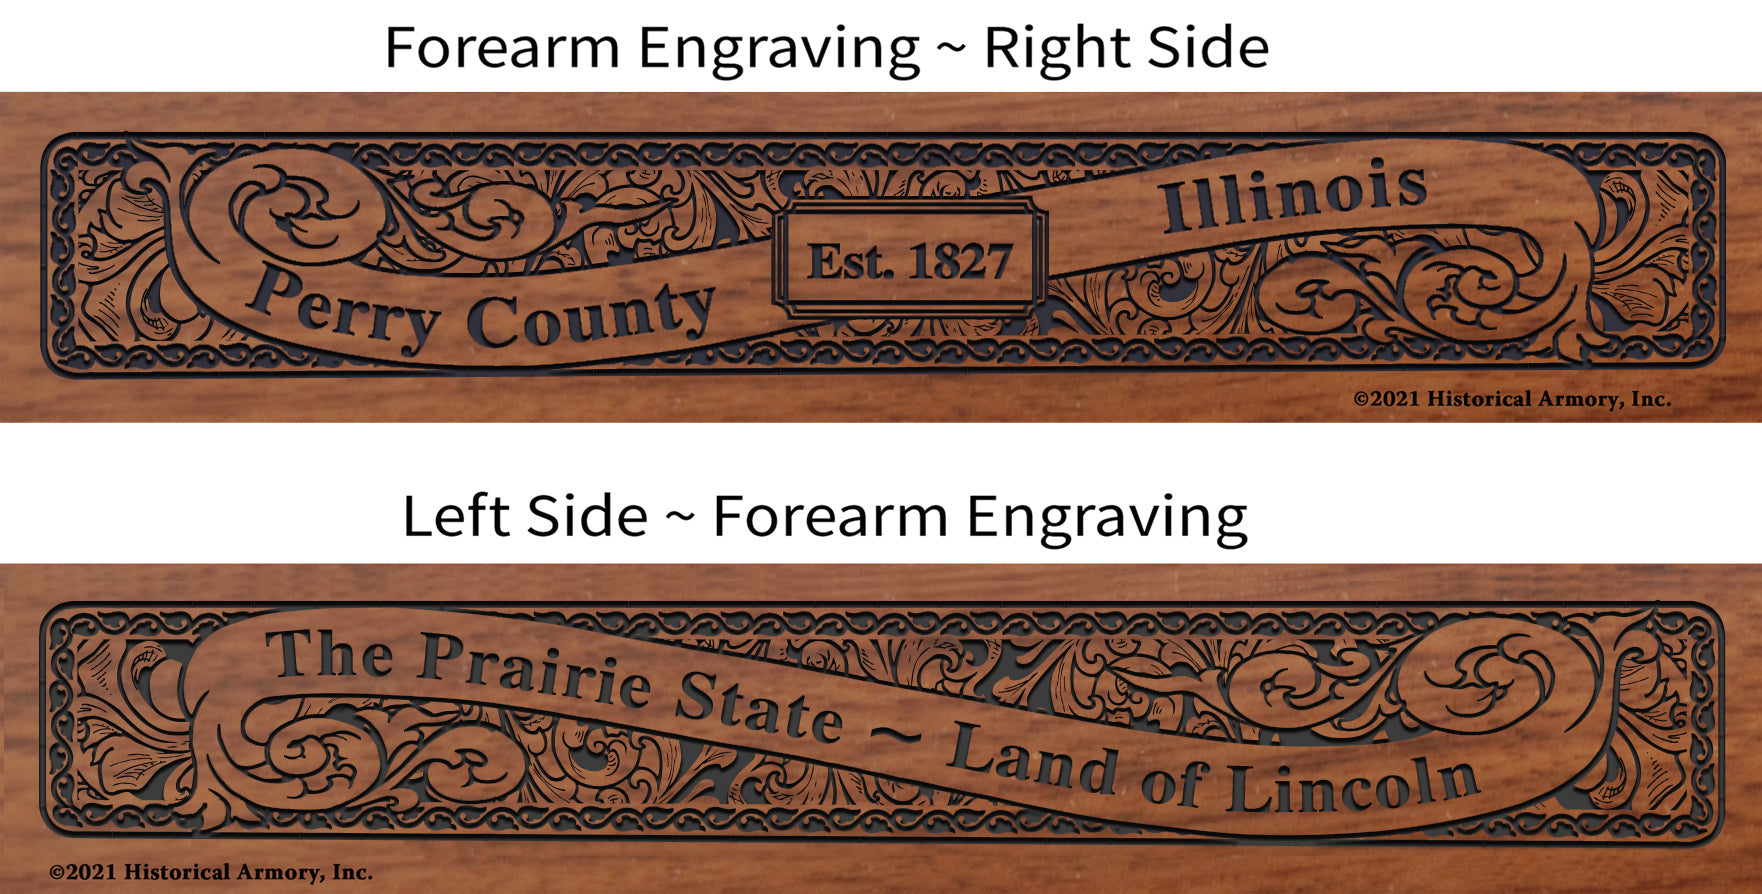 Perry County Illinois Establishment and Motto History Engraved Rifle Forearm